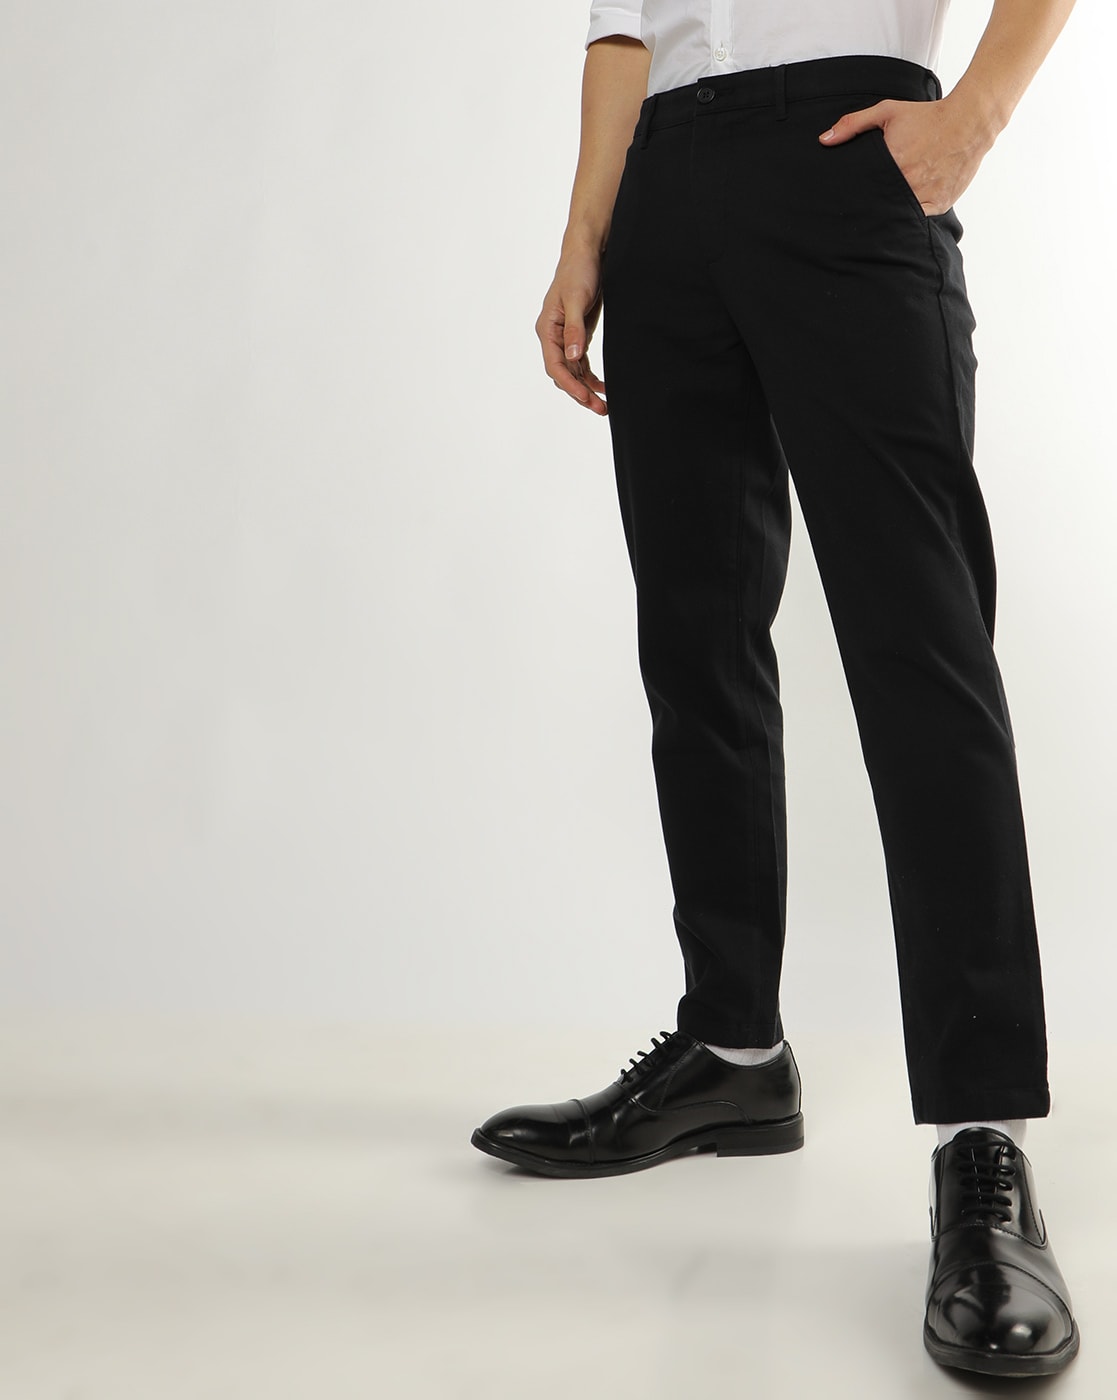 suit cropped trousers